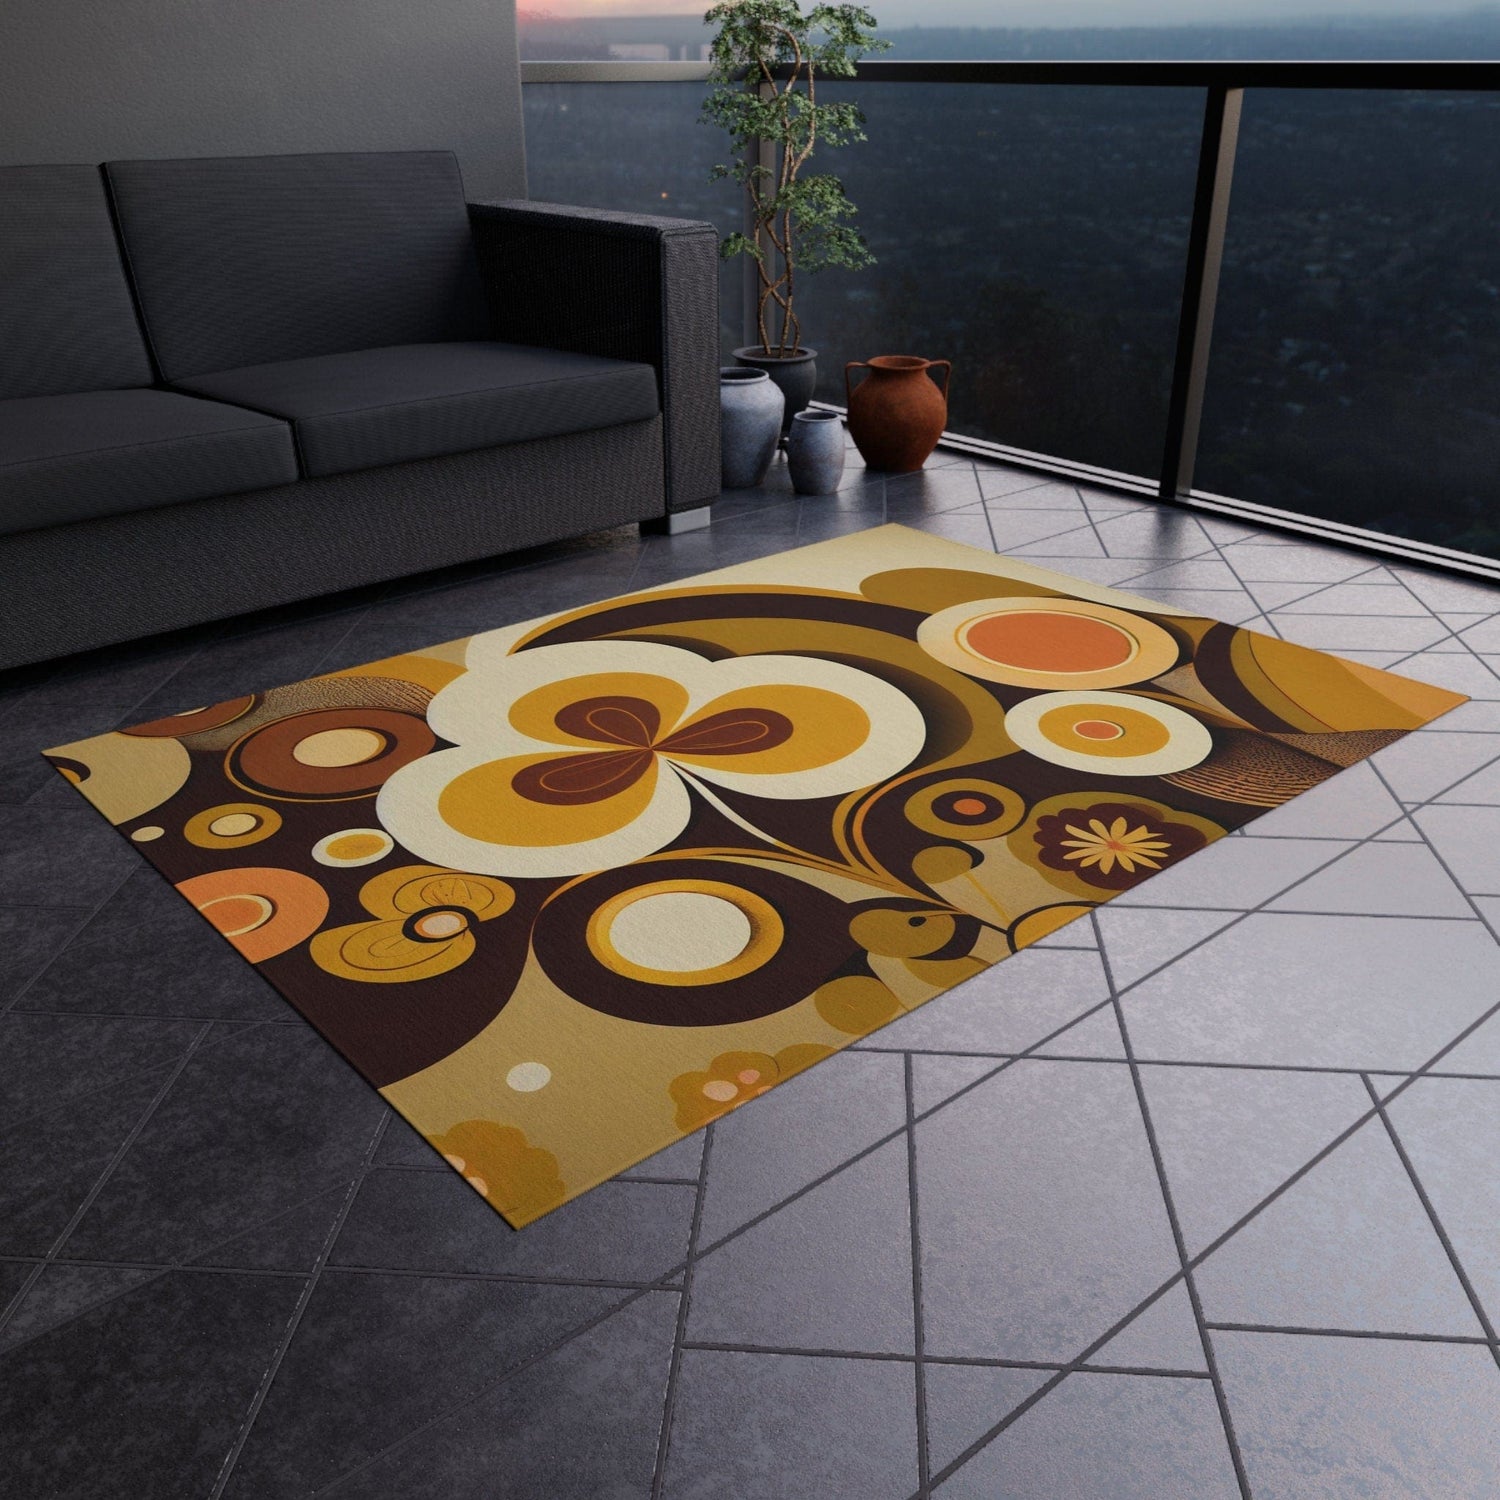 Kate McEnroe New York 60s MCM Retro Indoor - Outdoor Rug, 70s Groovy, Hippie Abstract Patio Rug, Mid Century Modern Living Room, Bedroom Porch Carpet - 123981223Rugs30598061485563124668